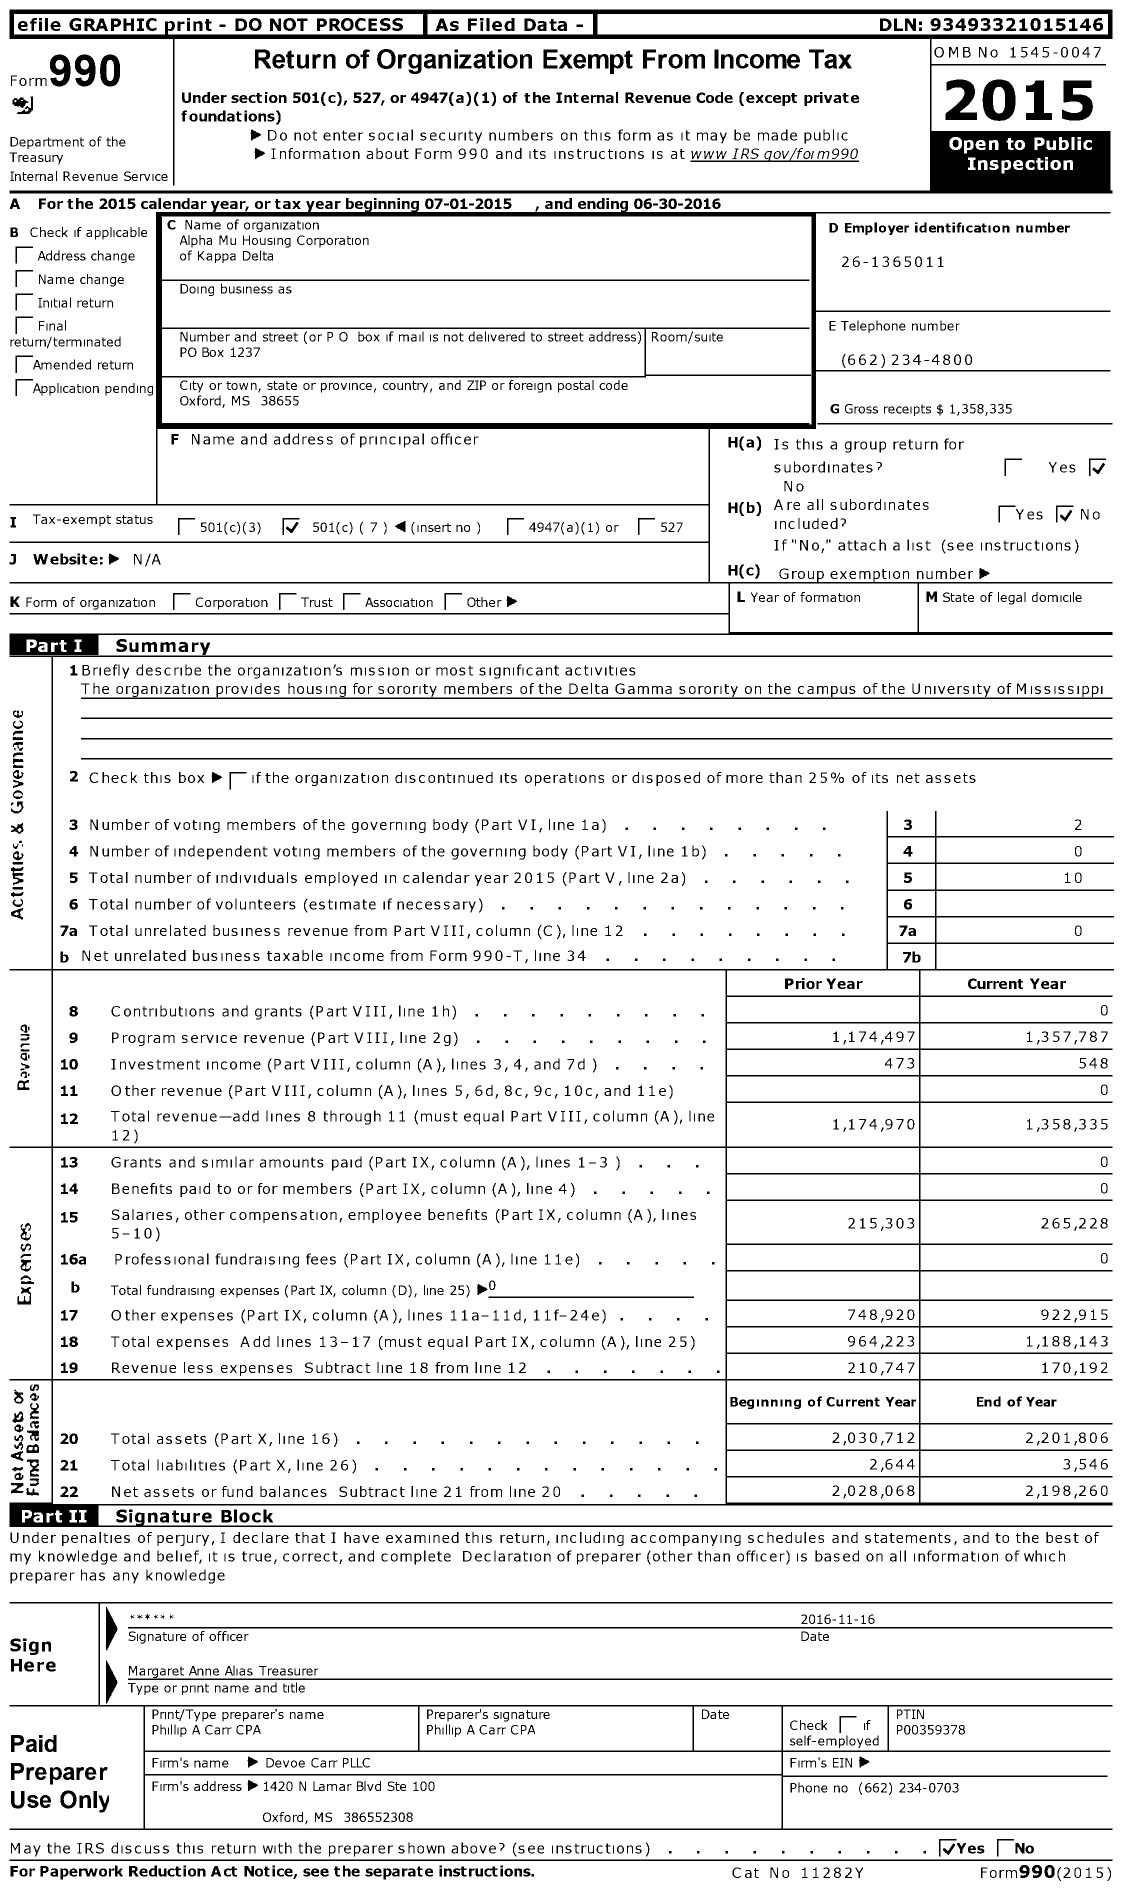 Image of first page of 2015 Form 990O for Alpha Mu Housing Corporation of Kappa Delta